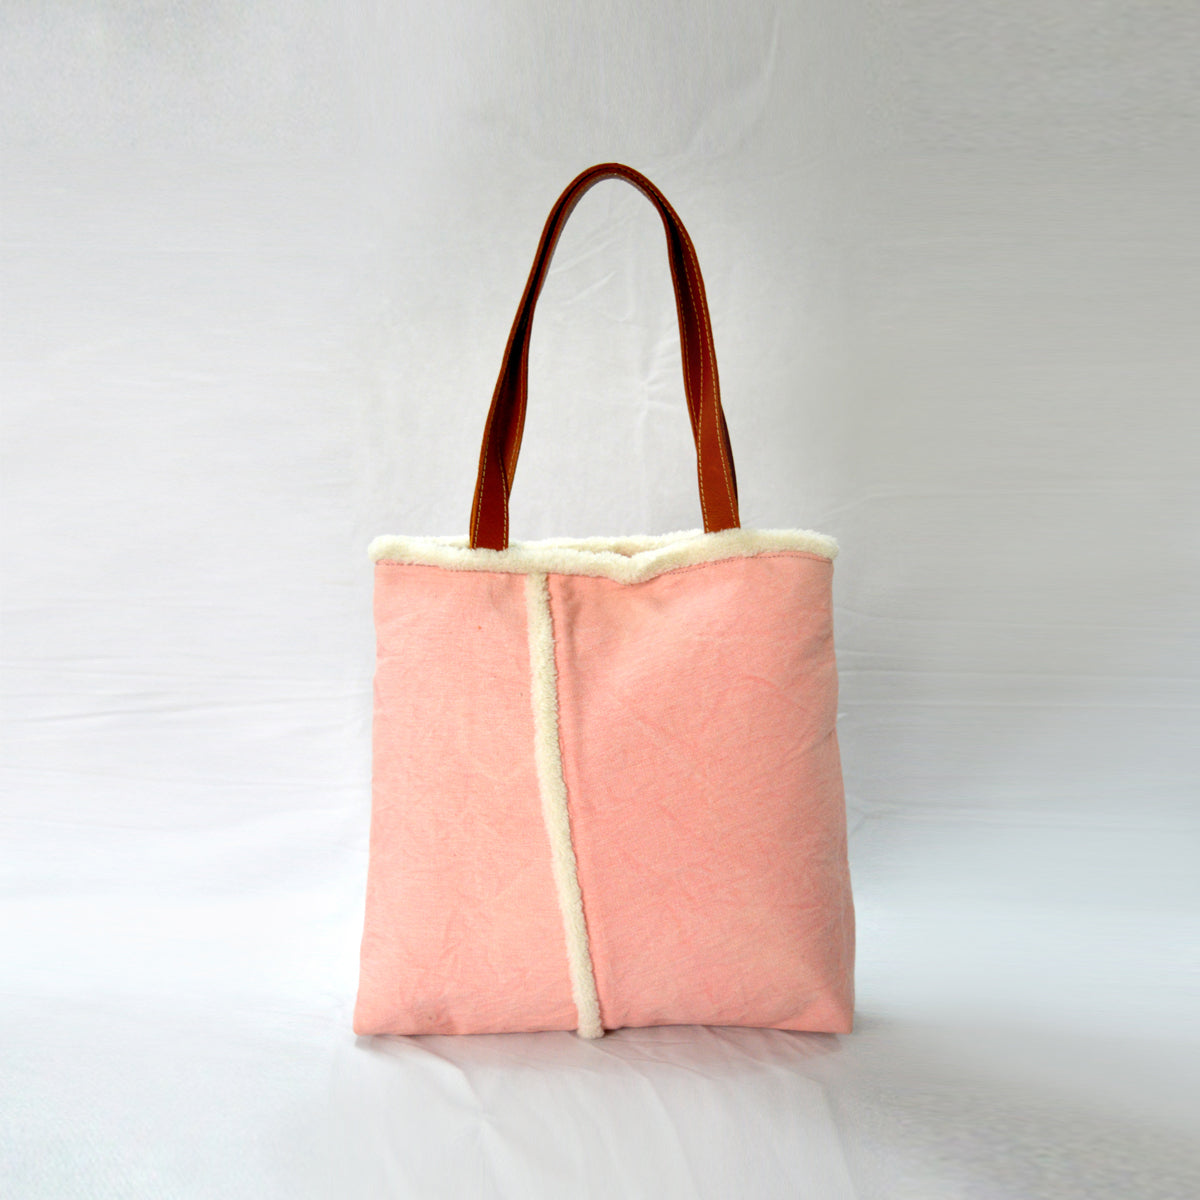 Tote bag - blush stonewashed canvas with leather handles